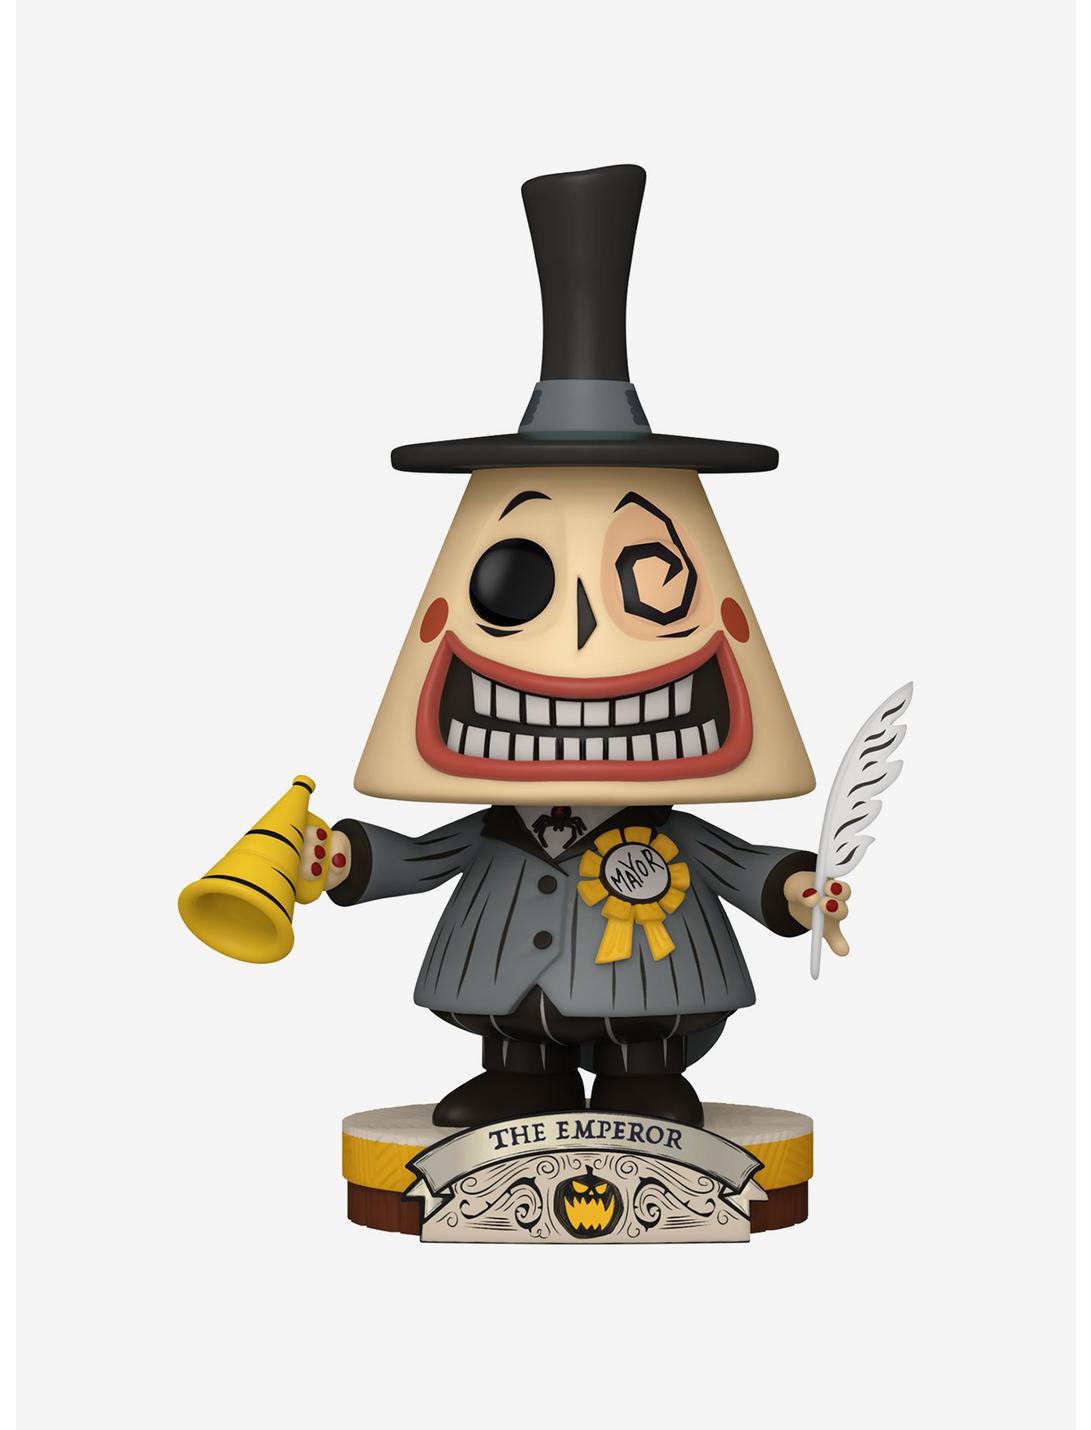 Funko The Nightmare Before Christmas Pop! The Mayor As The Emperor Vinyl Figure Hot Topic Exclusive, , hi-res